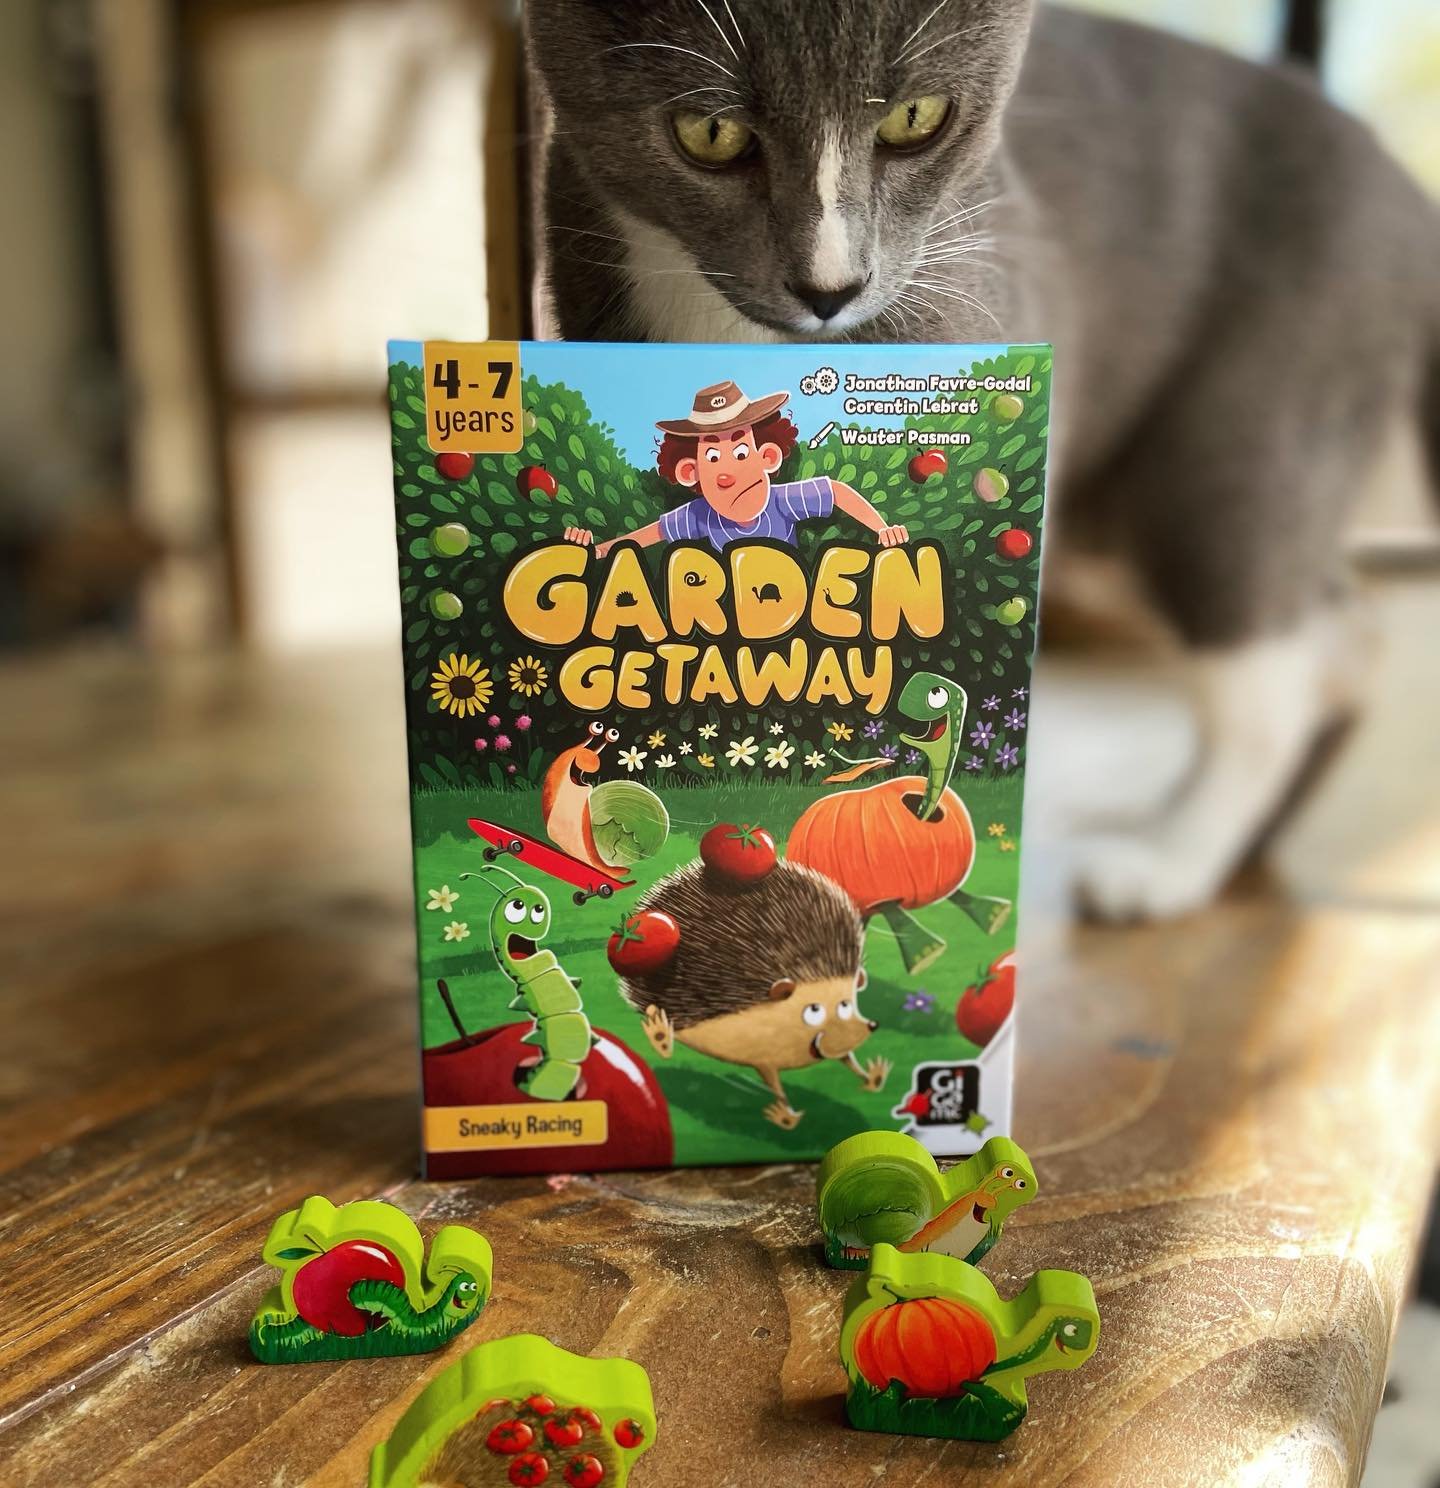 Just got in Garden Getaway to test from @hachetteboardgamesusa and @gigamicworld. Going to try this cute one out with the kids soon. It&rsquo;s a racing game for ages 4-7. Interesting because a lot of times games would say 4+ but this one provides an